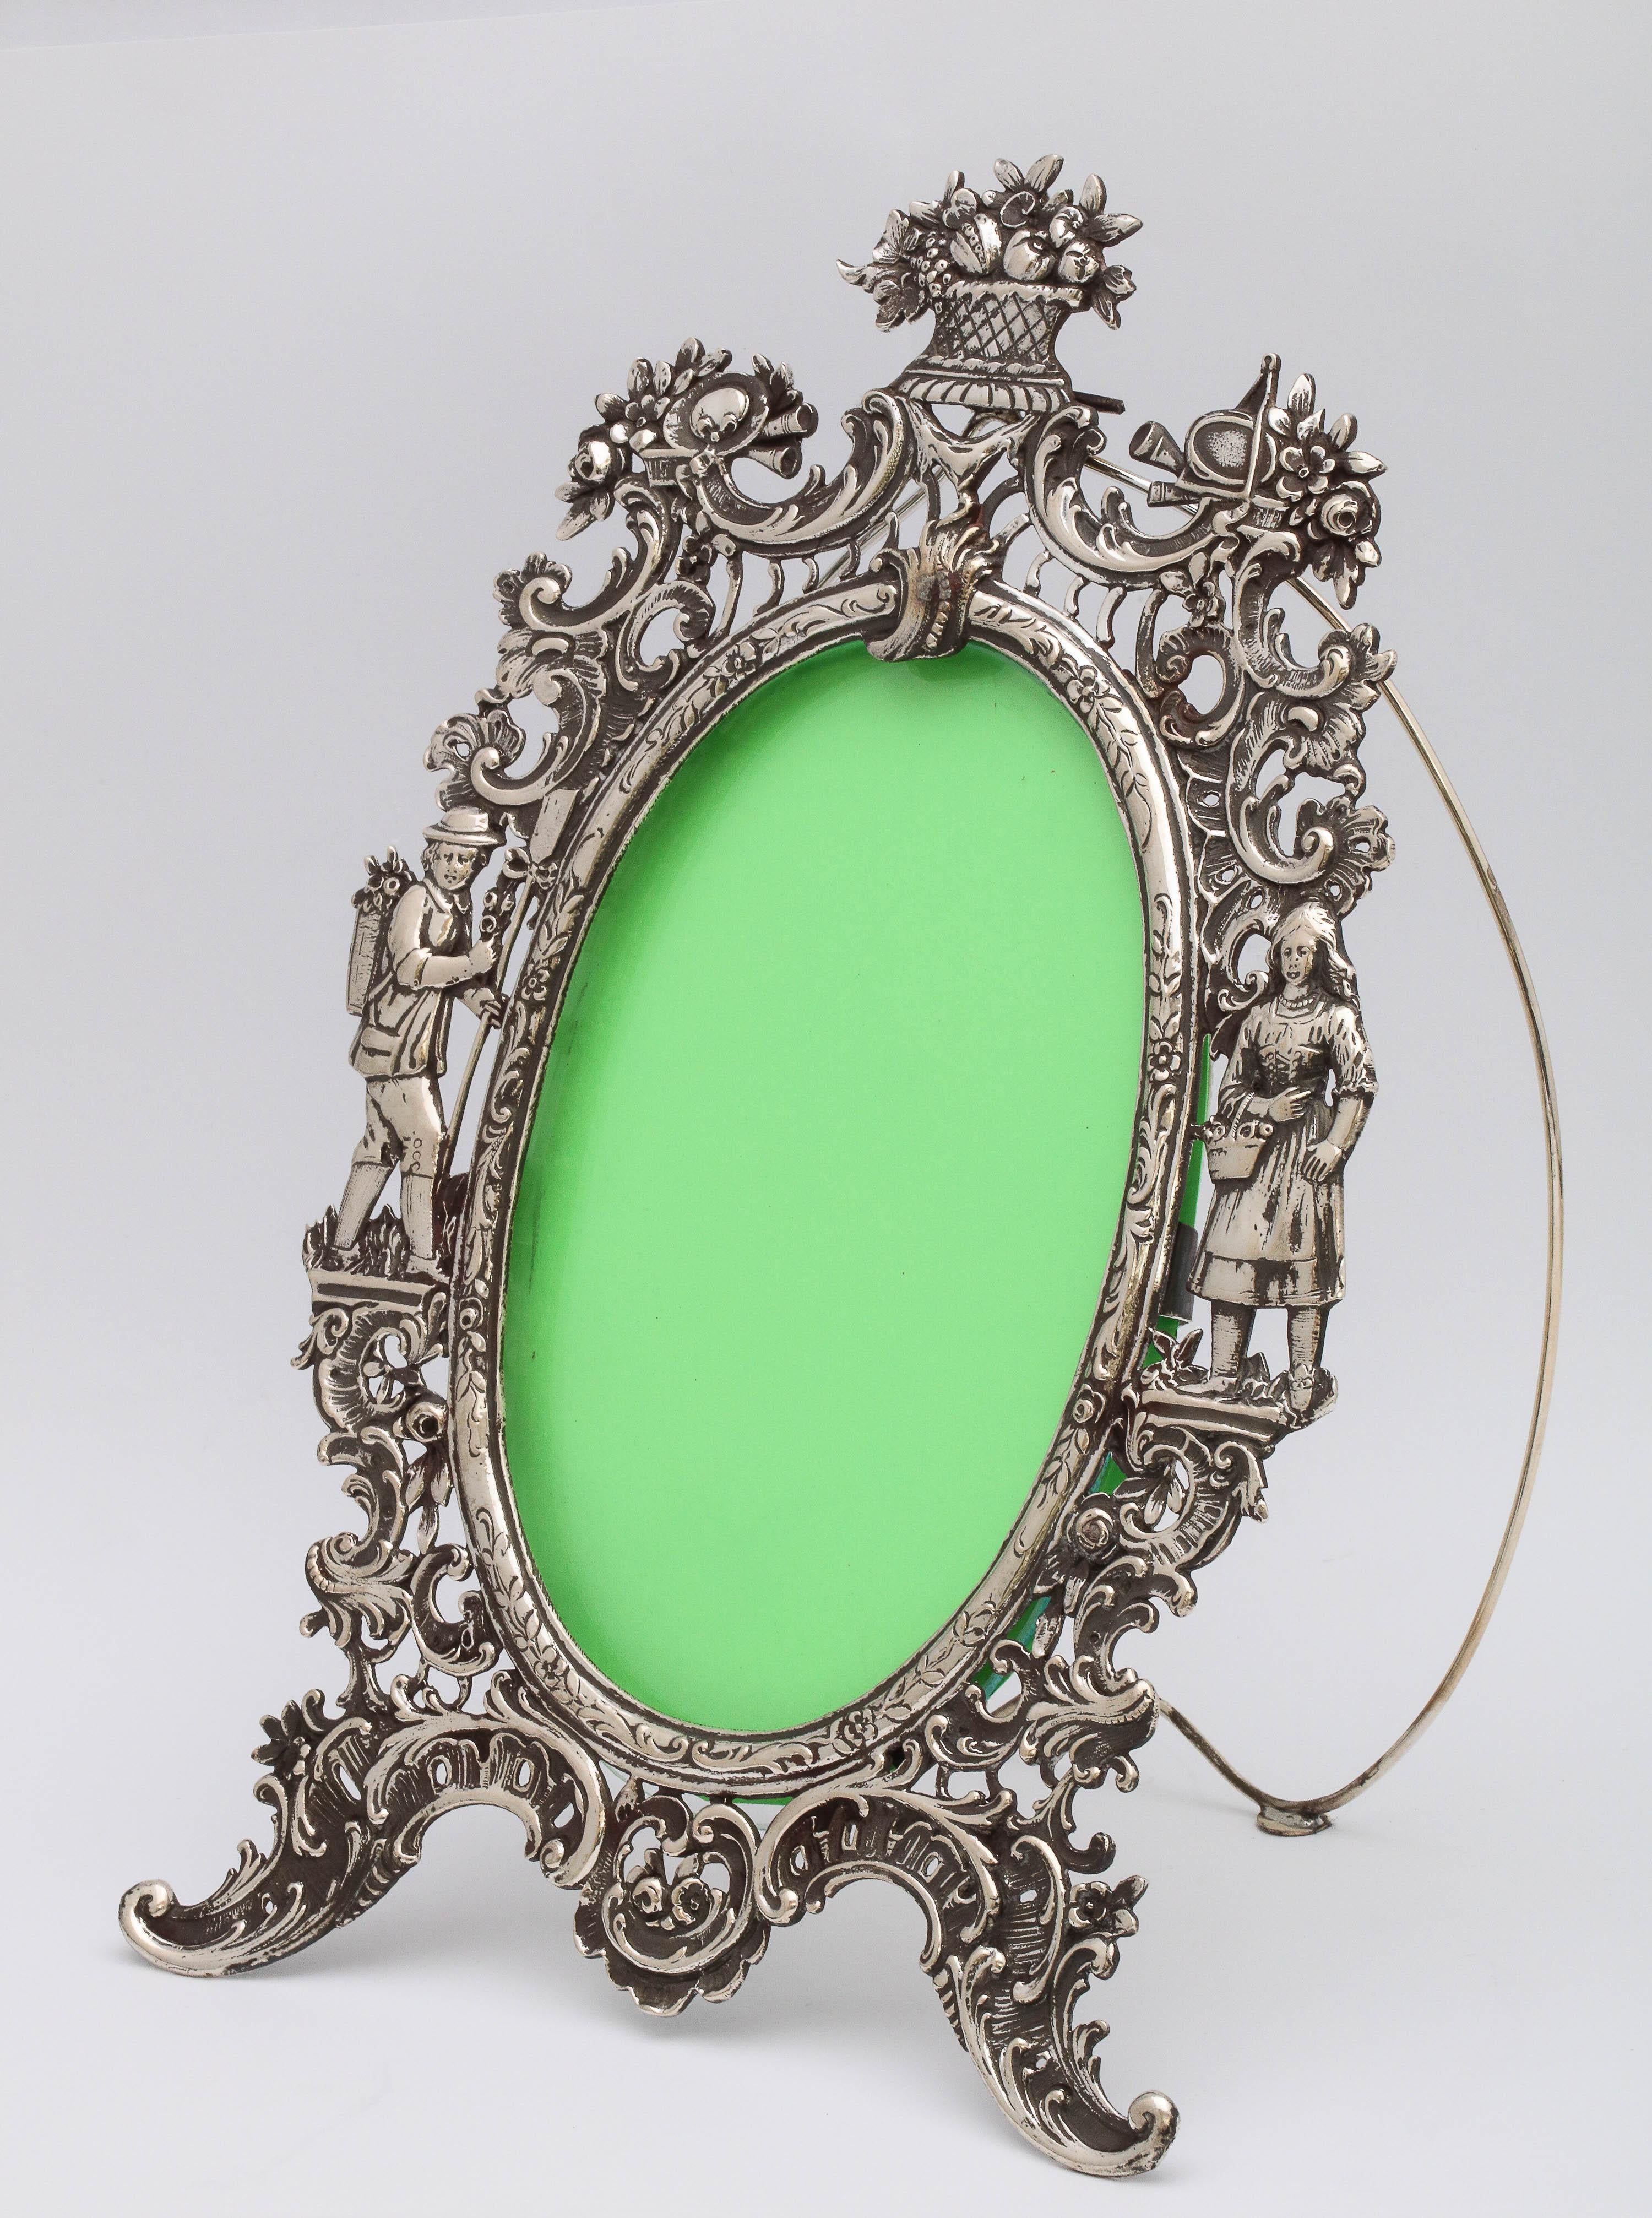 Victorian, Hanau, continental silver (.800) picture frame, Germany, circa 1895, Wolff and Knell - makers. Frame, including the easel, is entirely silver. Decorated with a flower basket (with flowers) at the top; The rest of the frame is decorated